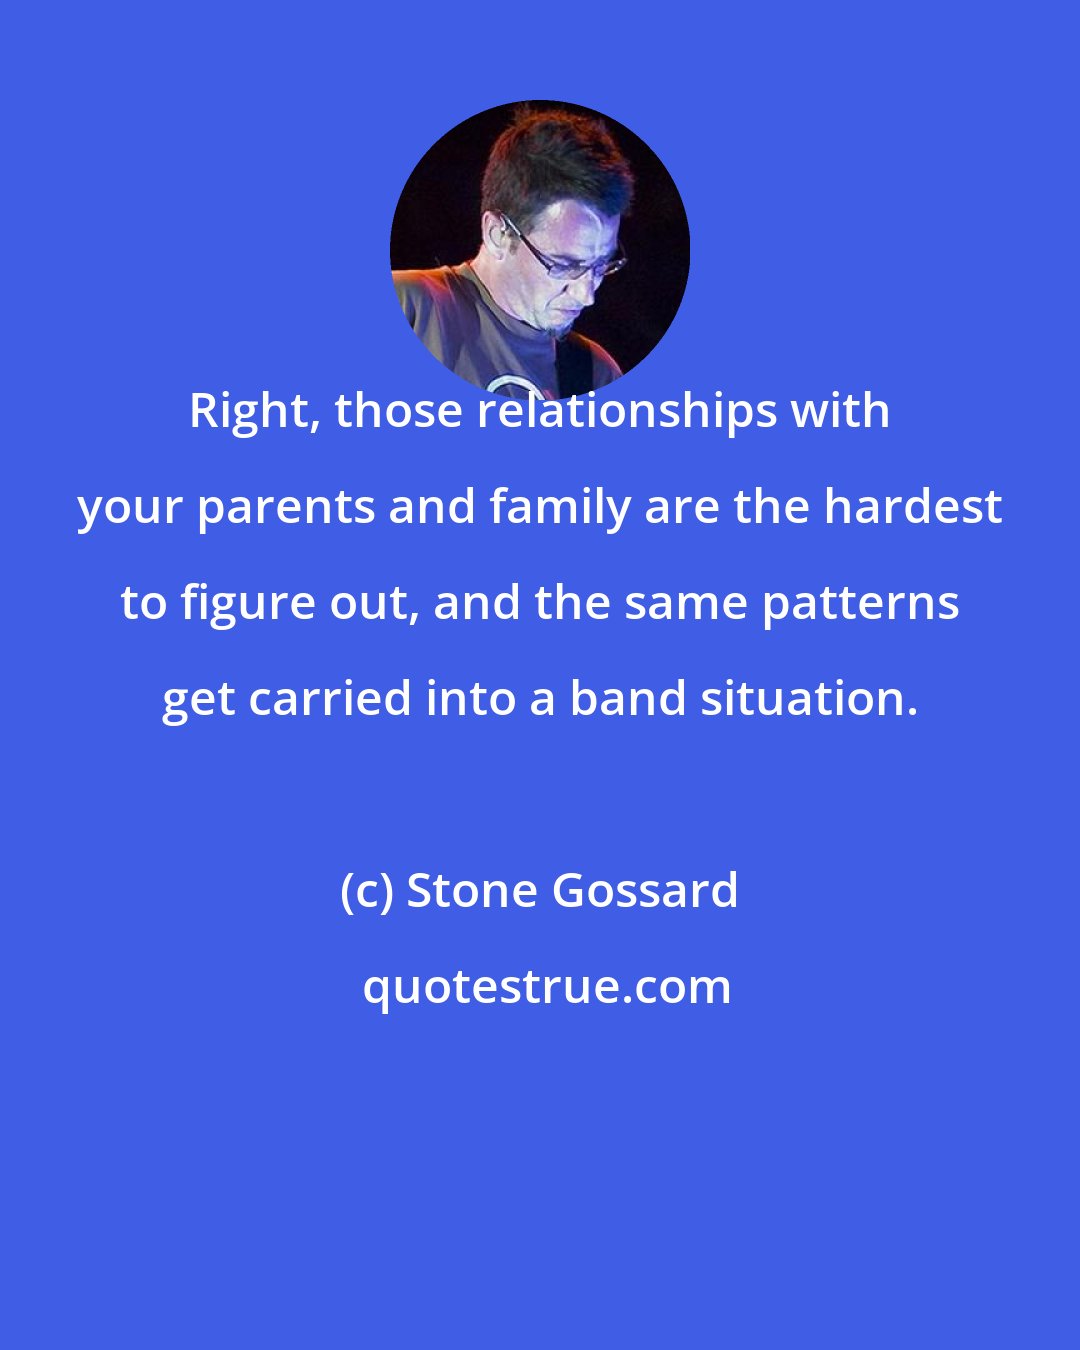 Stone Gossard: Right, those relationships with your parents and family are the hardest to figure out, and the same patterns get carried into a band situation.